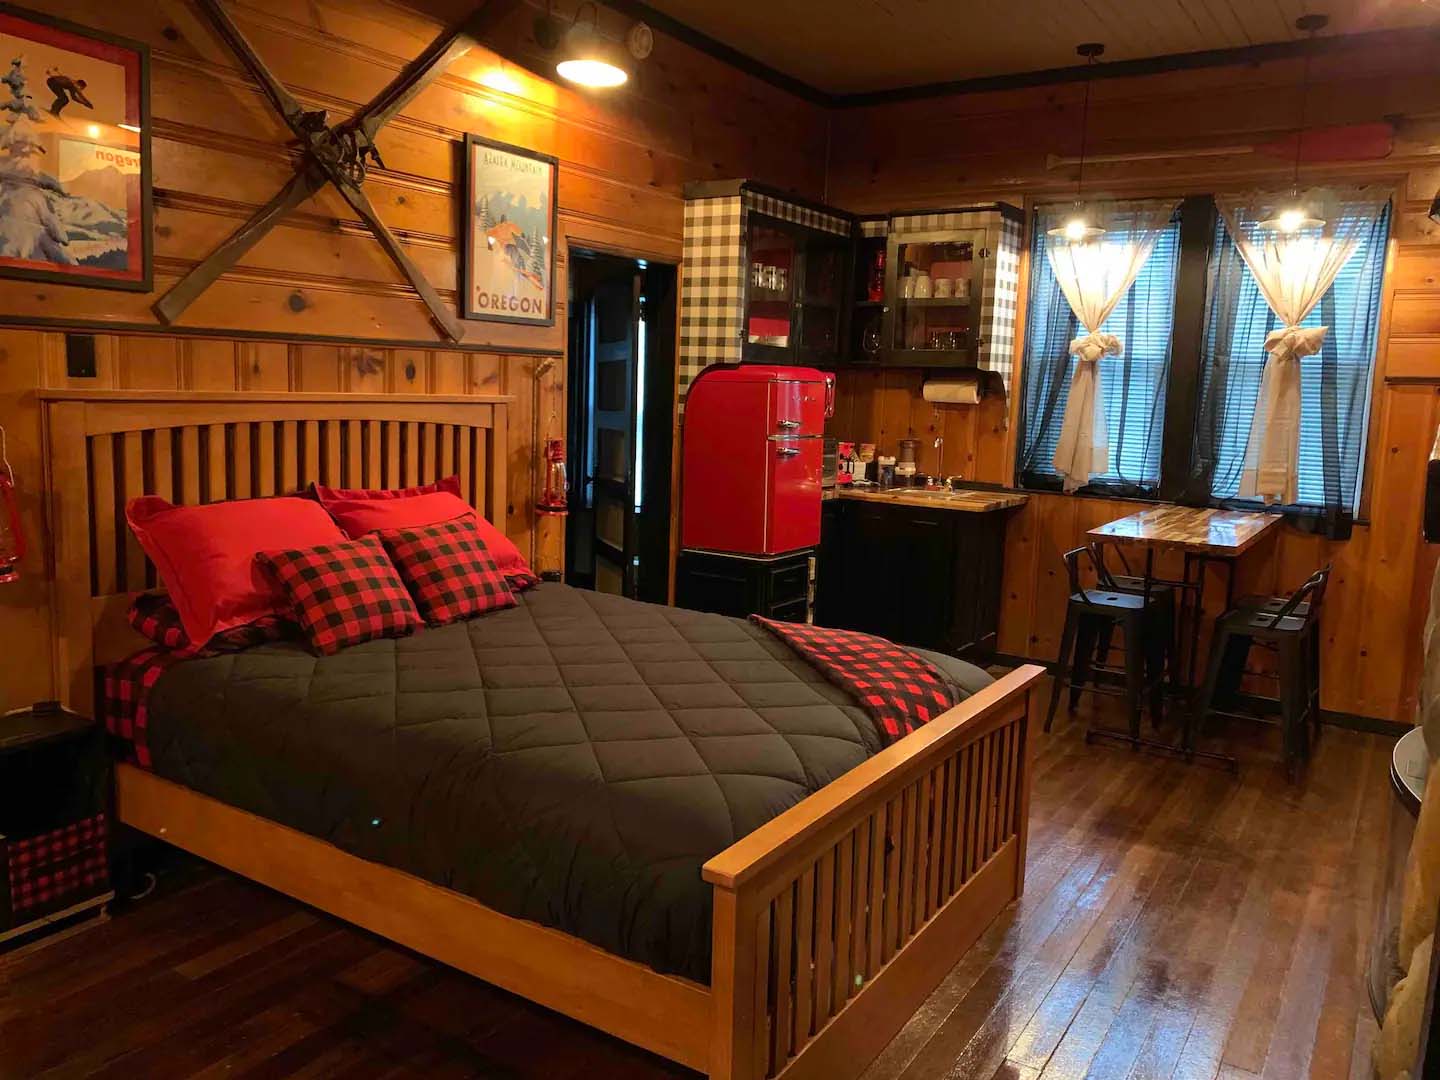 Stay Overnight in a Restored General Store in This Historic Oregon Town